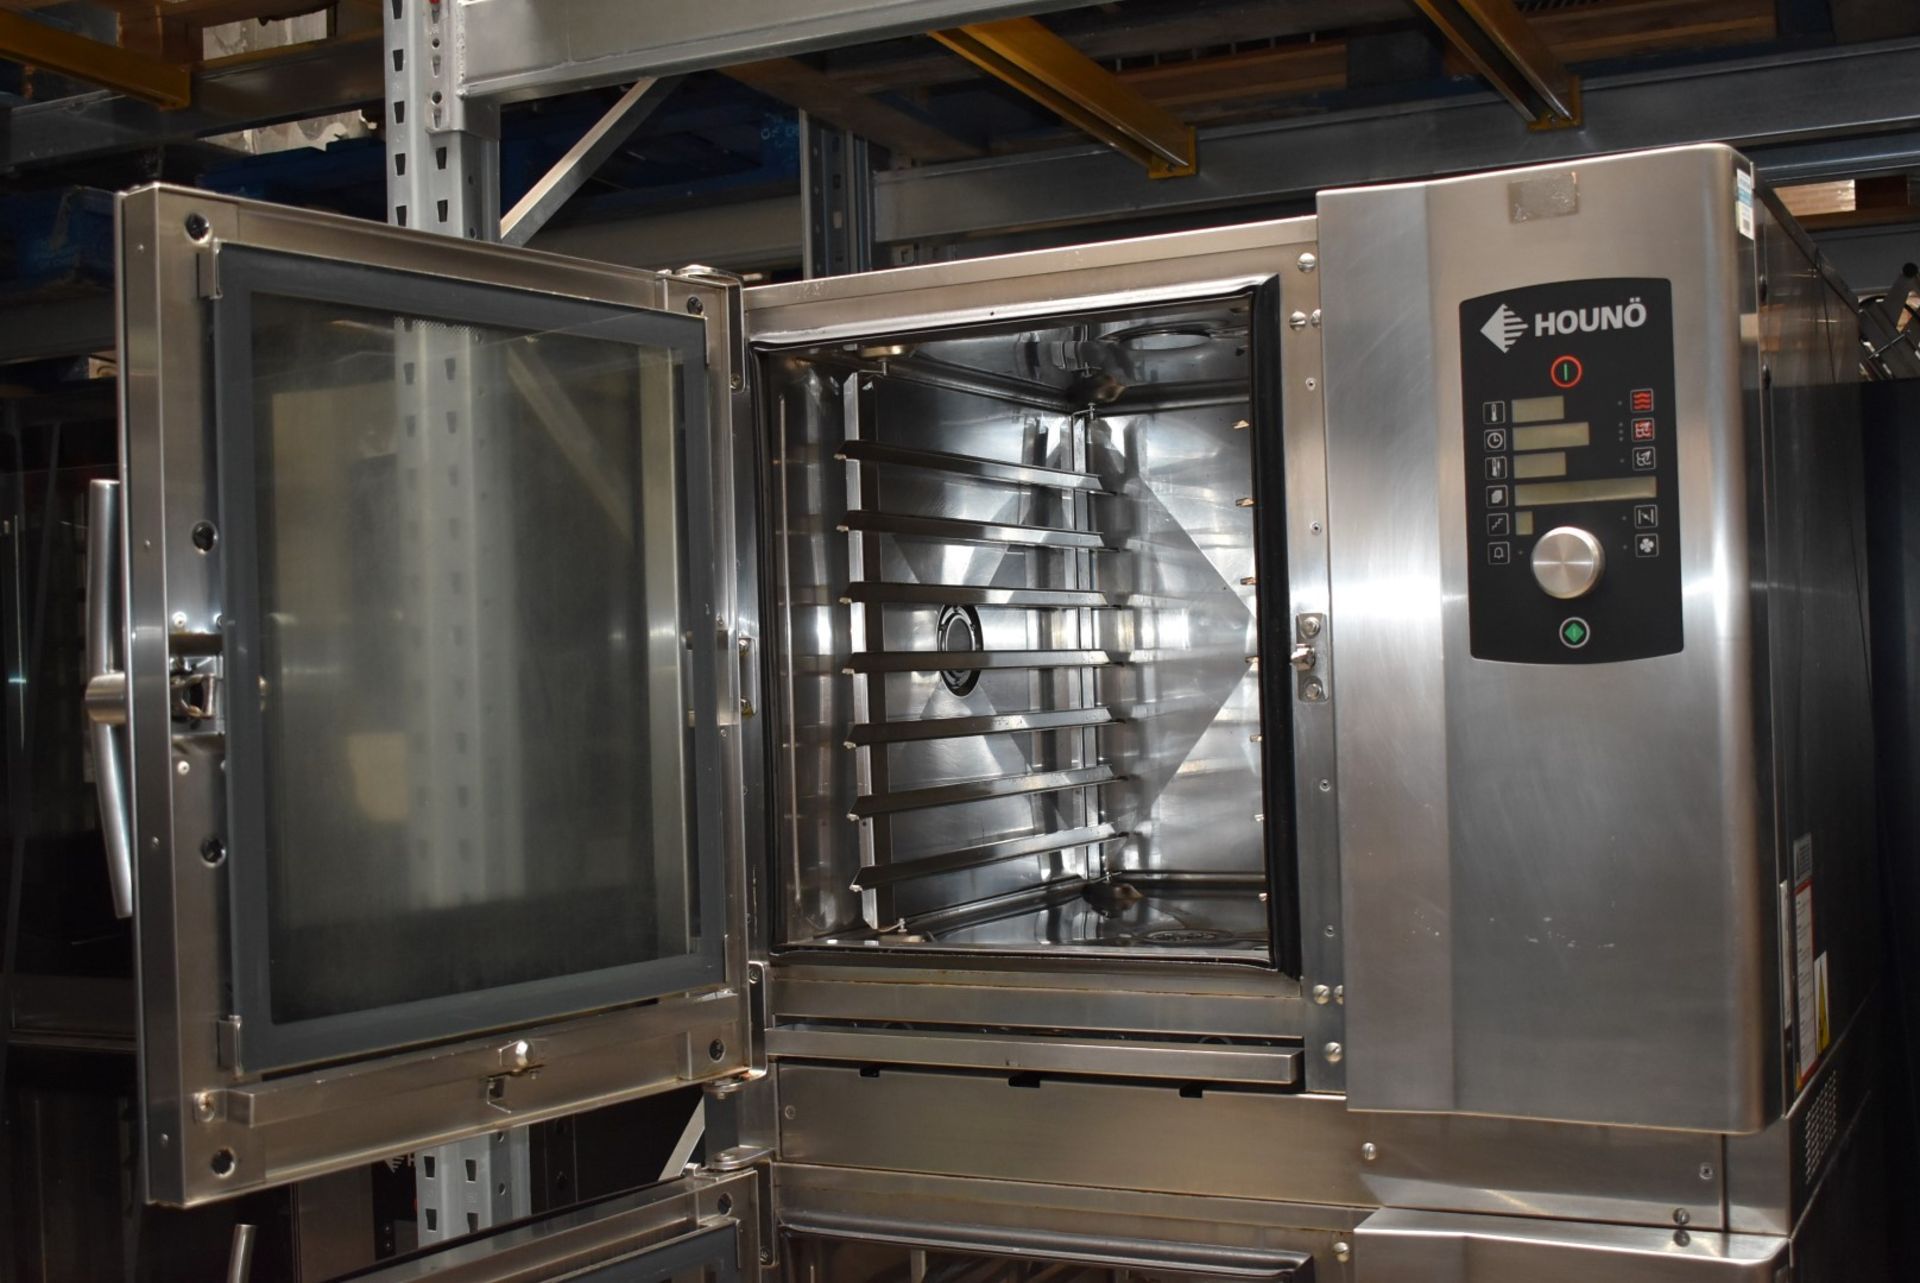 1 x Houno Double 6 Grid Stacked Combi Oven - Model: C 1.06 / CPE 1.06 - 3 Phase - Image 15 of 21